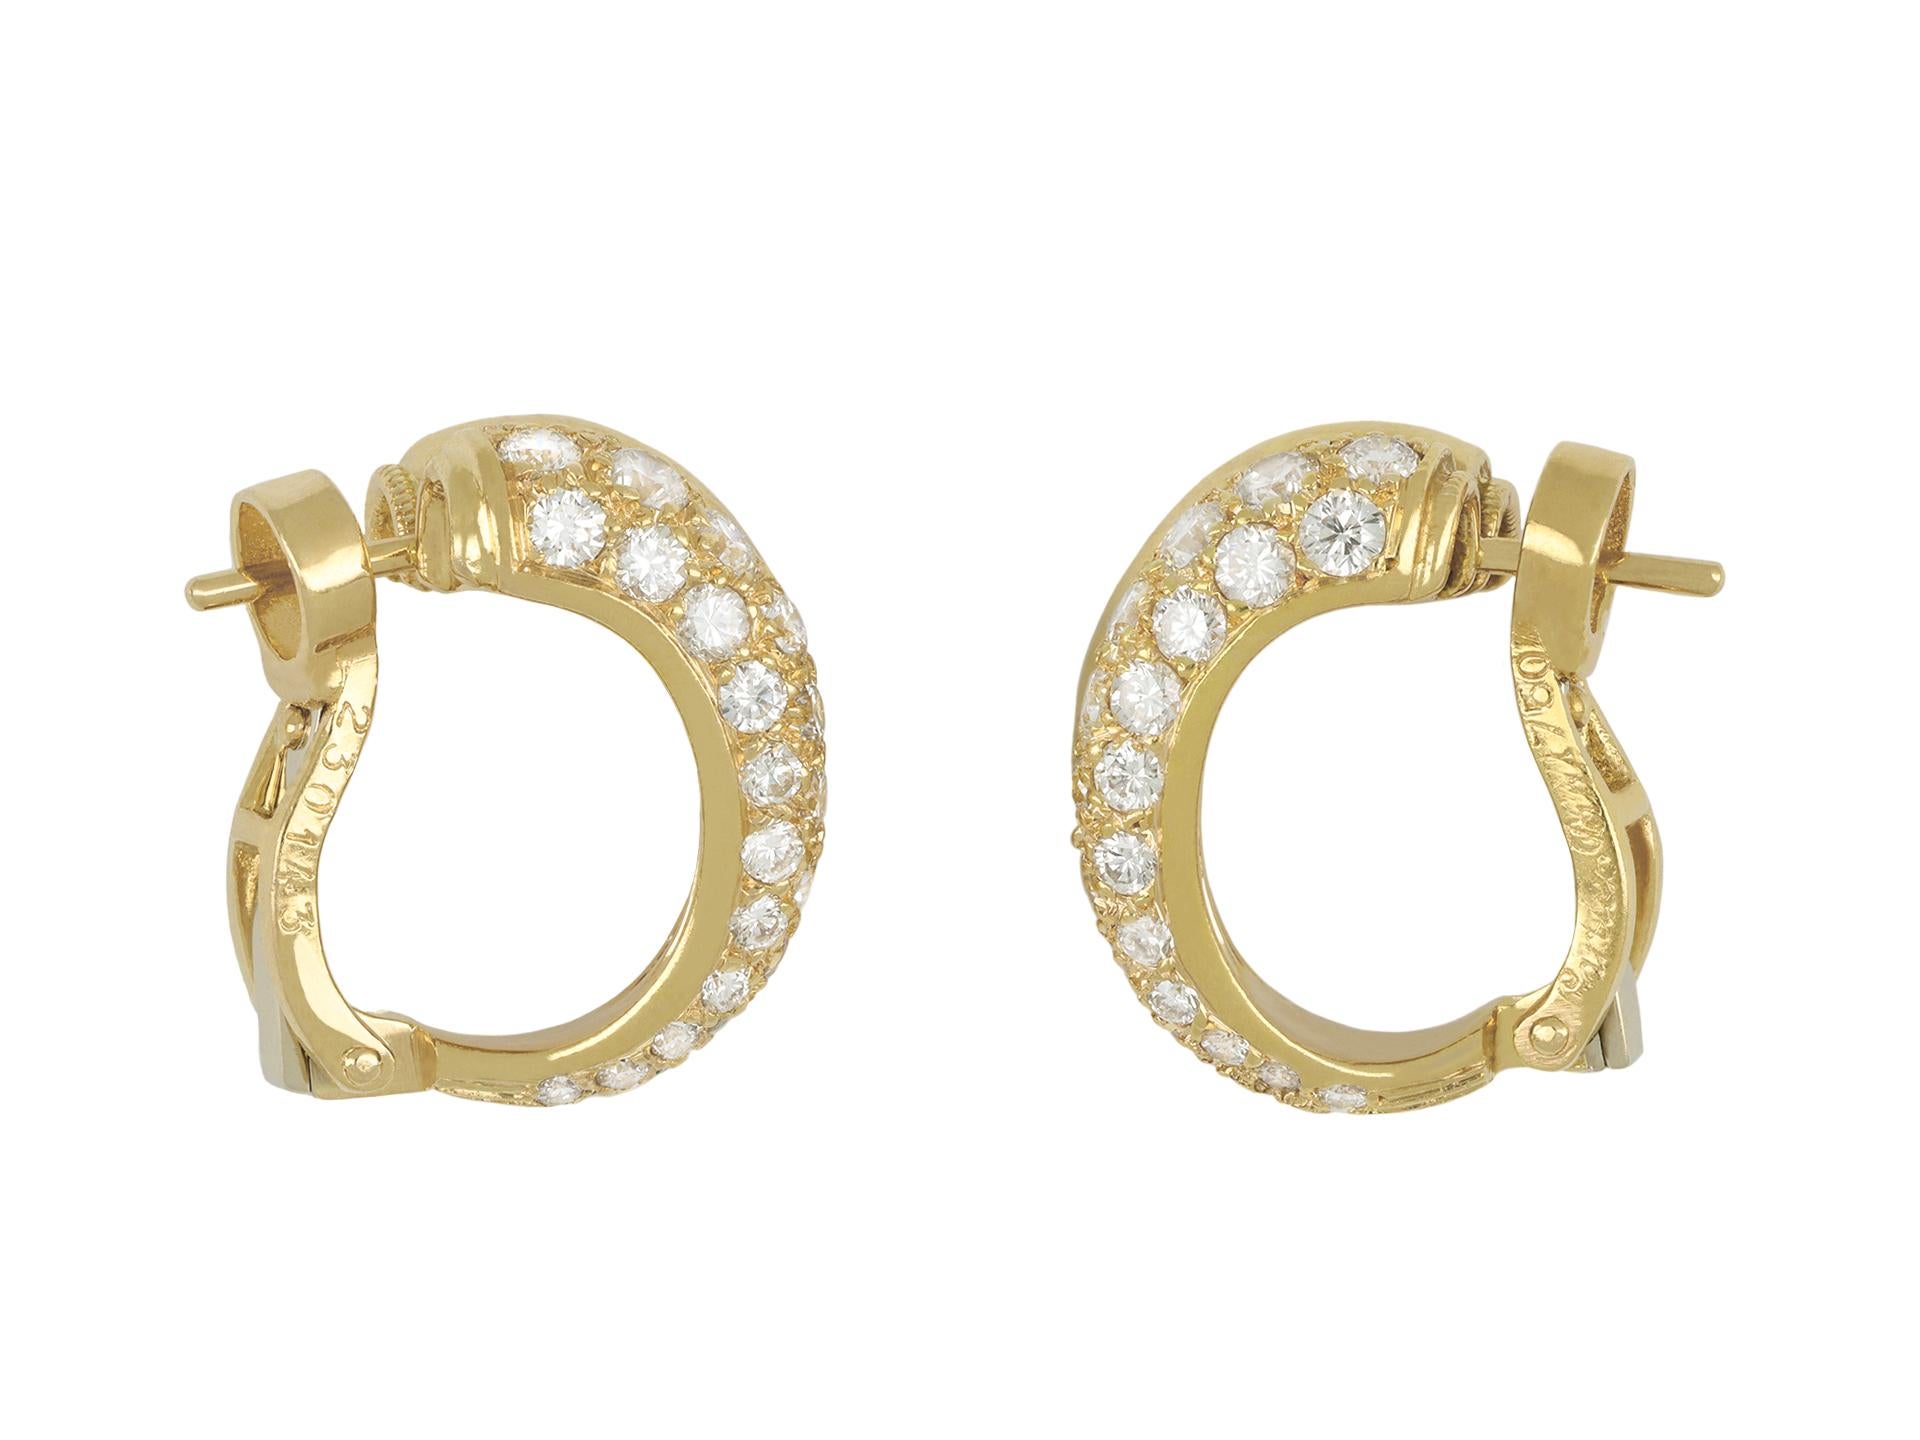 Cartier diamond hoop earrings. A matching pair, each set with thirty round transitional cut diamonds, sixty in total in open back grain settings, with a combined approximate weight of 1.40 carats, to a double hoop design featuring polished metalwork